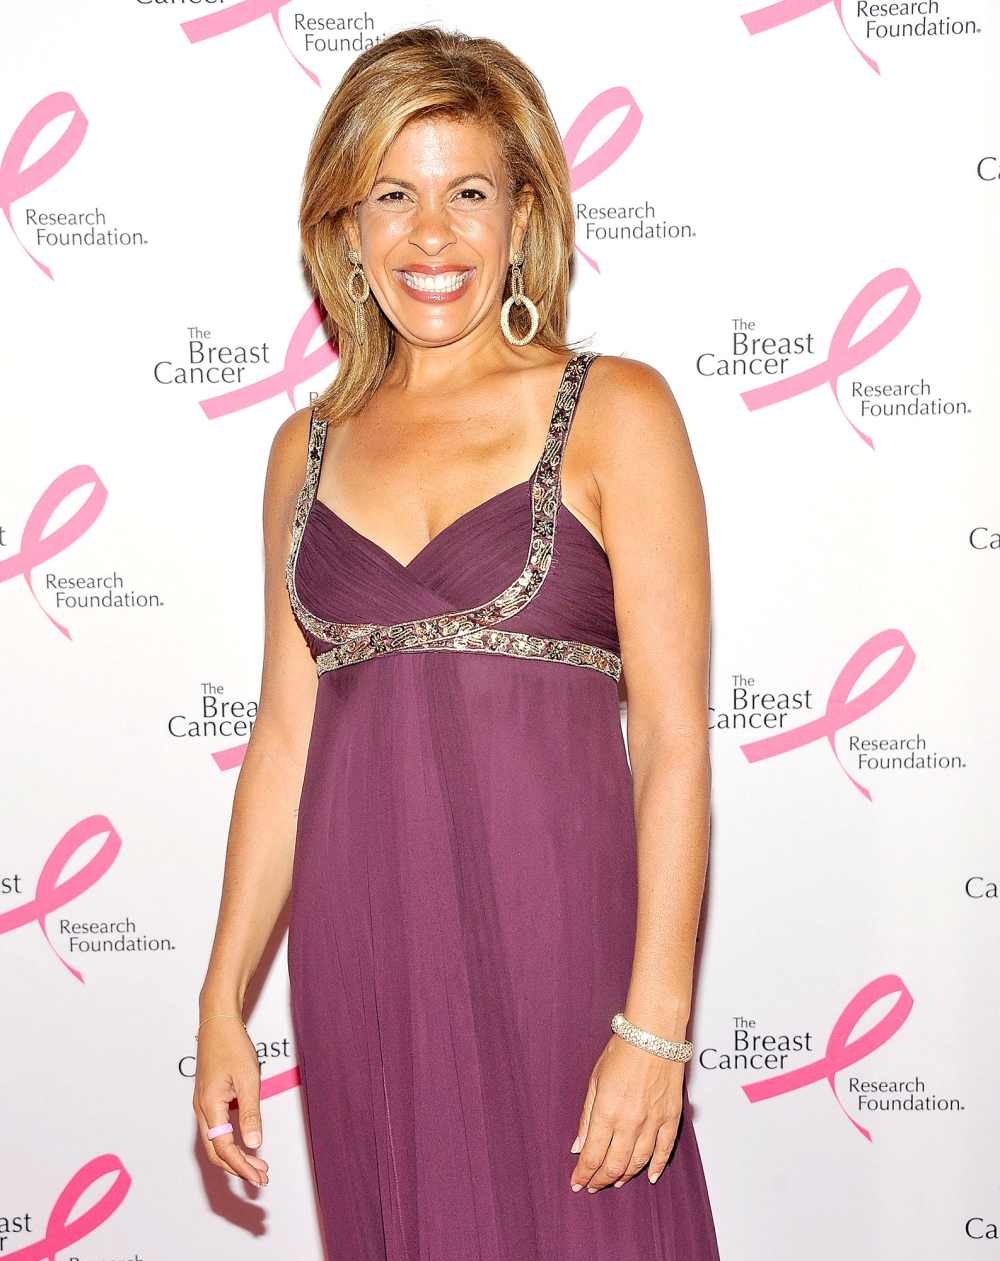 Hoda Kotb at The Breast Cancer Research Foundation's 2012 Hot Pink Party at The Waldorf-Astoria on April 30, 2012 in New York City.